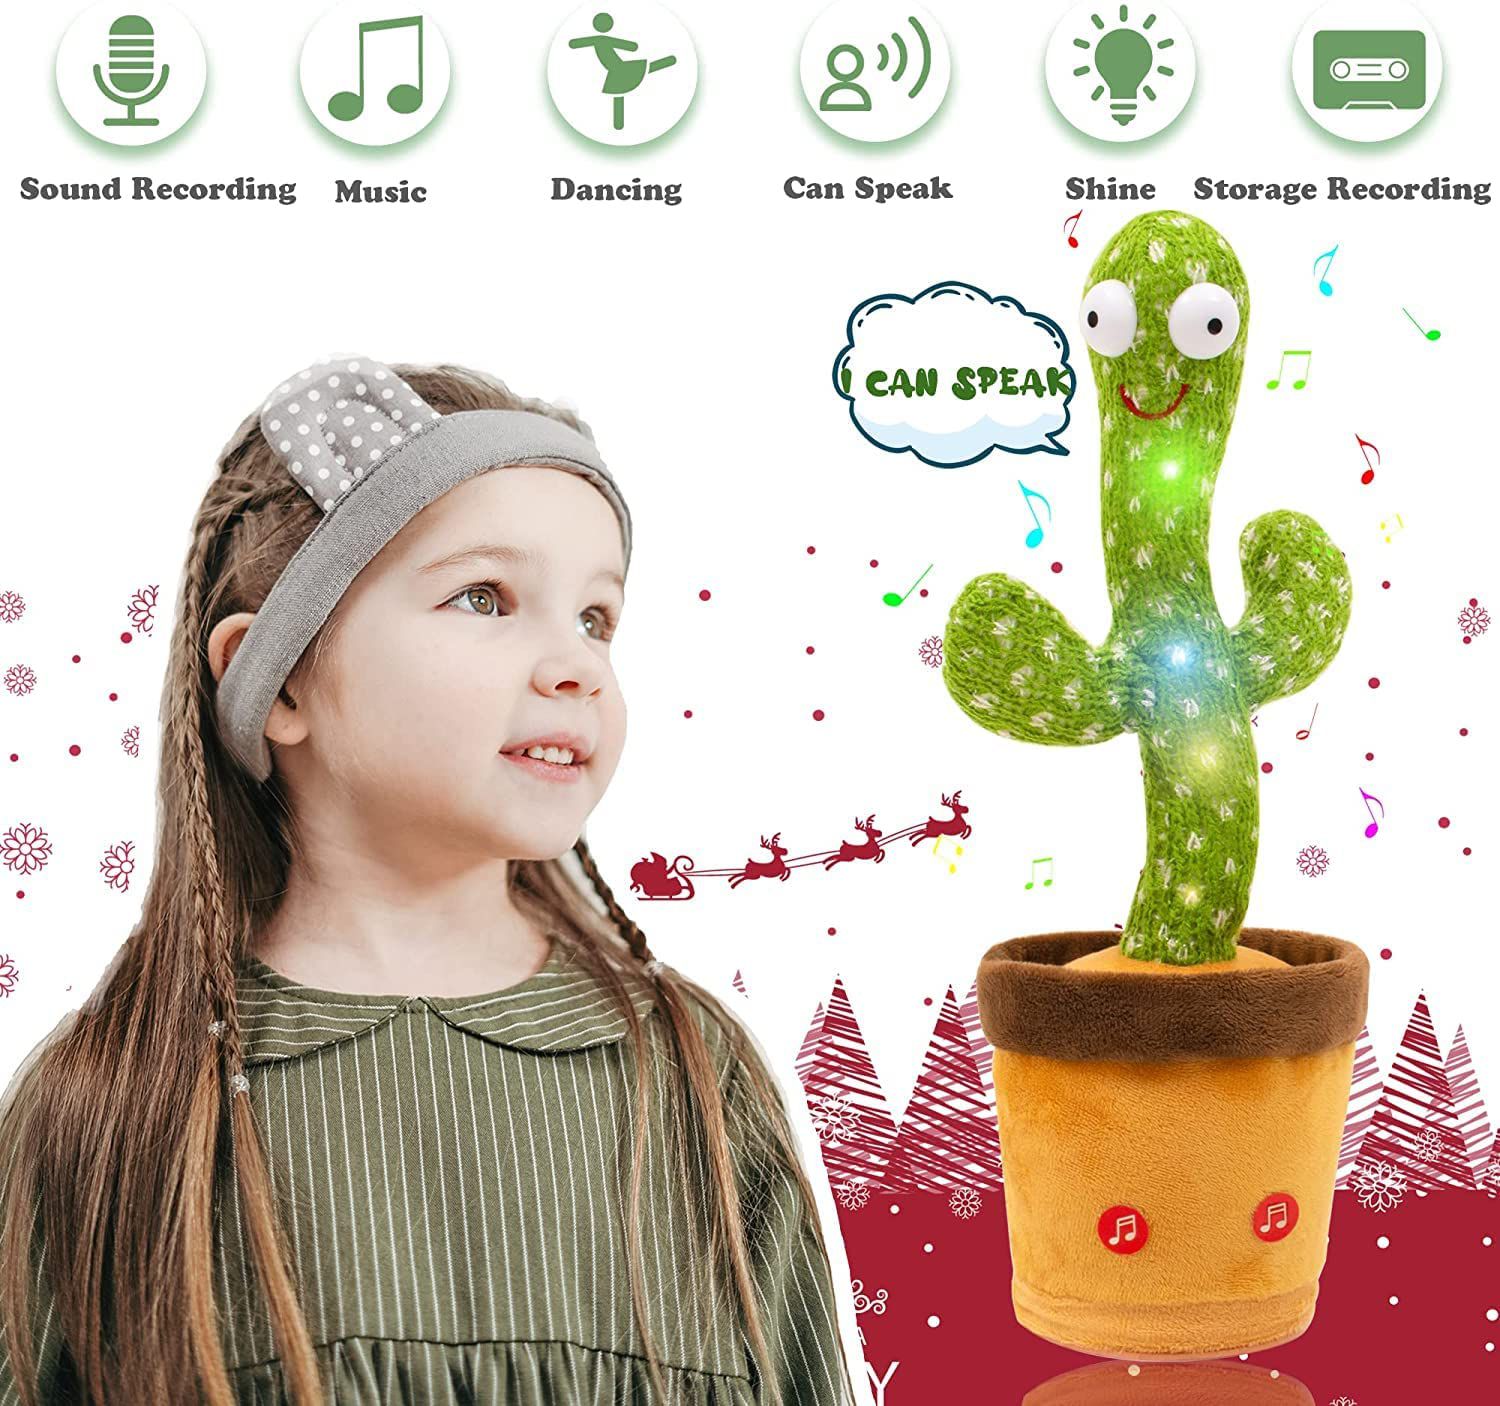     			Tzoo Dancing Cactus Talking Kids Toy, Cactus Plush Toy, Wriggle & Singing Recording Repeat What You Say Funny Education Toys for Babies Children Playing, Home Decorate (Cactus Toy)